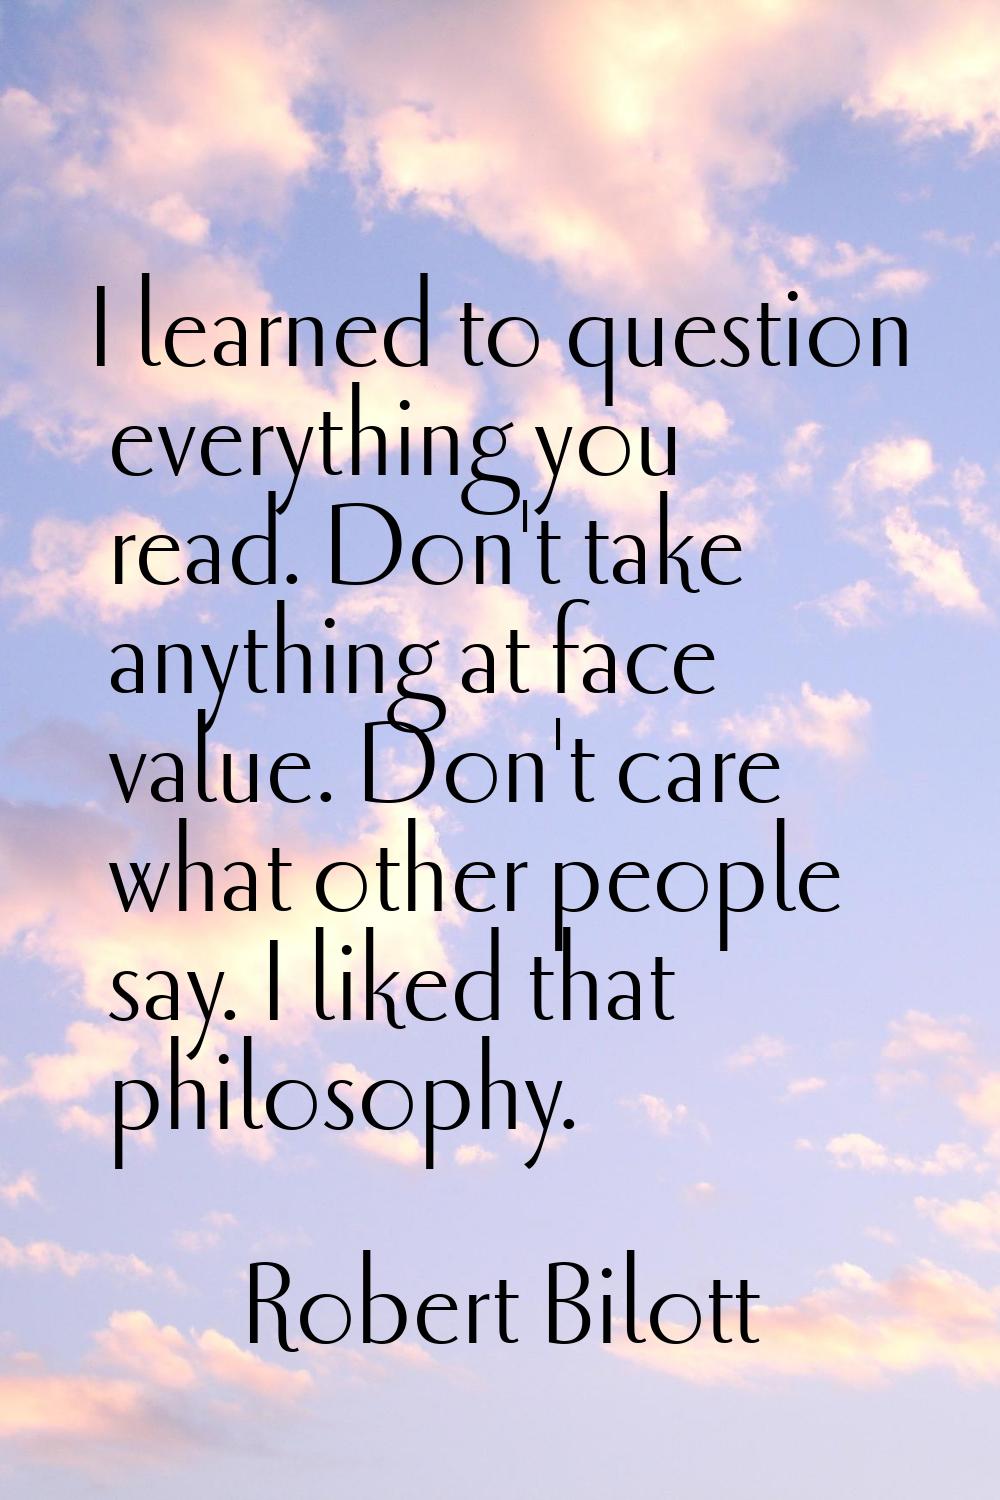 I learned to question everything you read. Don't take anything at face value. Don't care what other